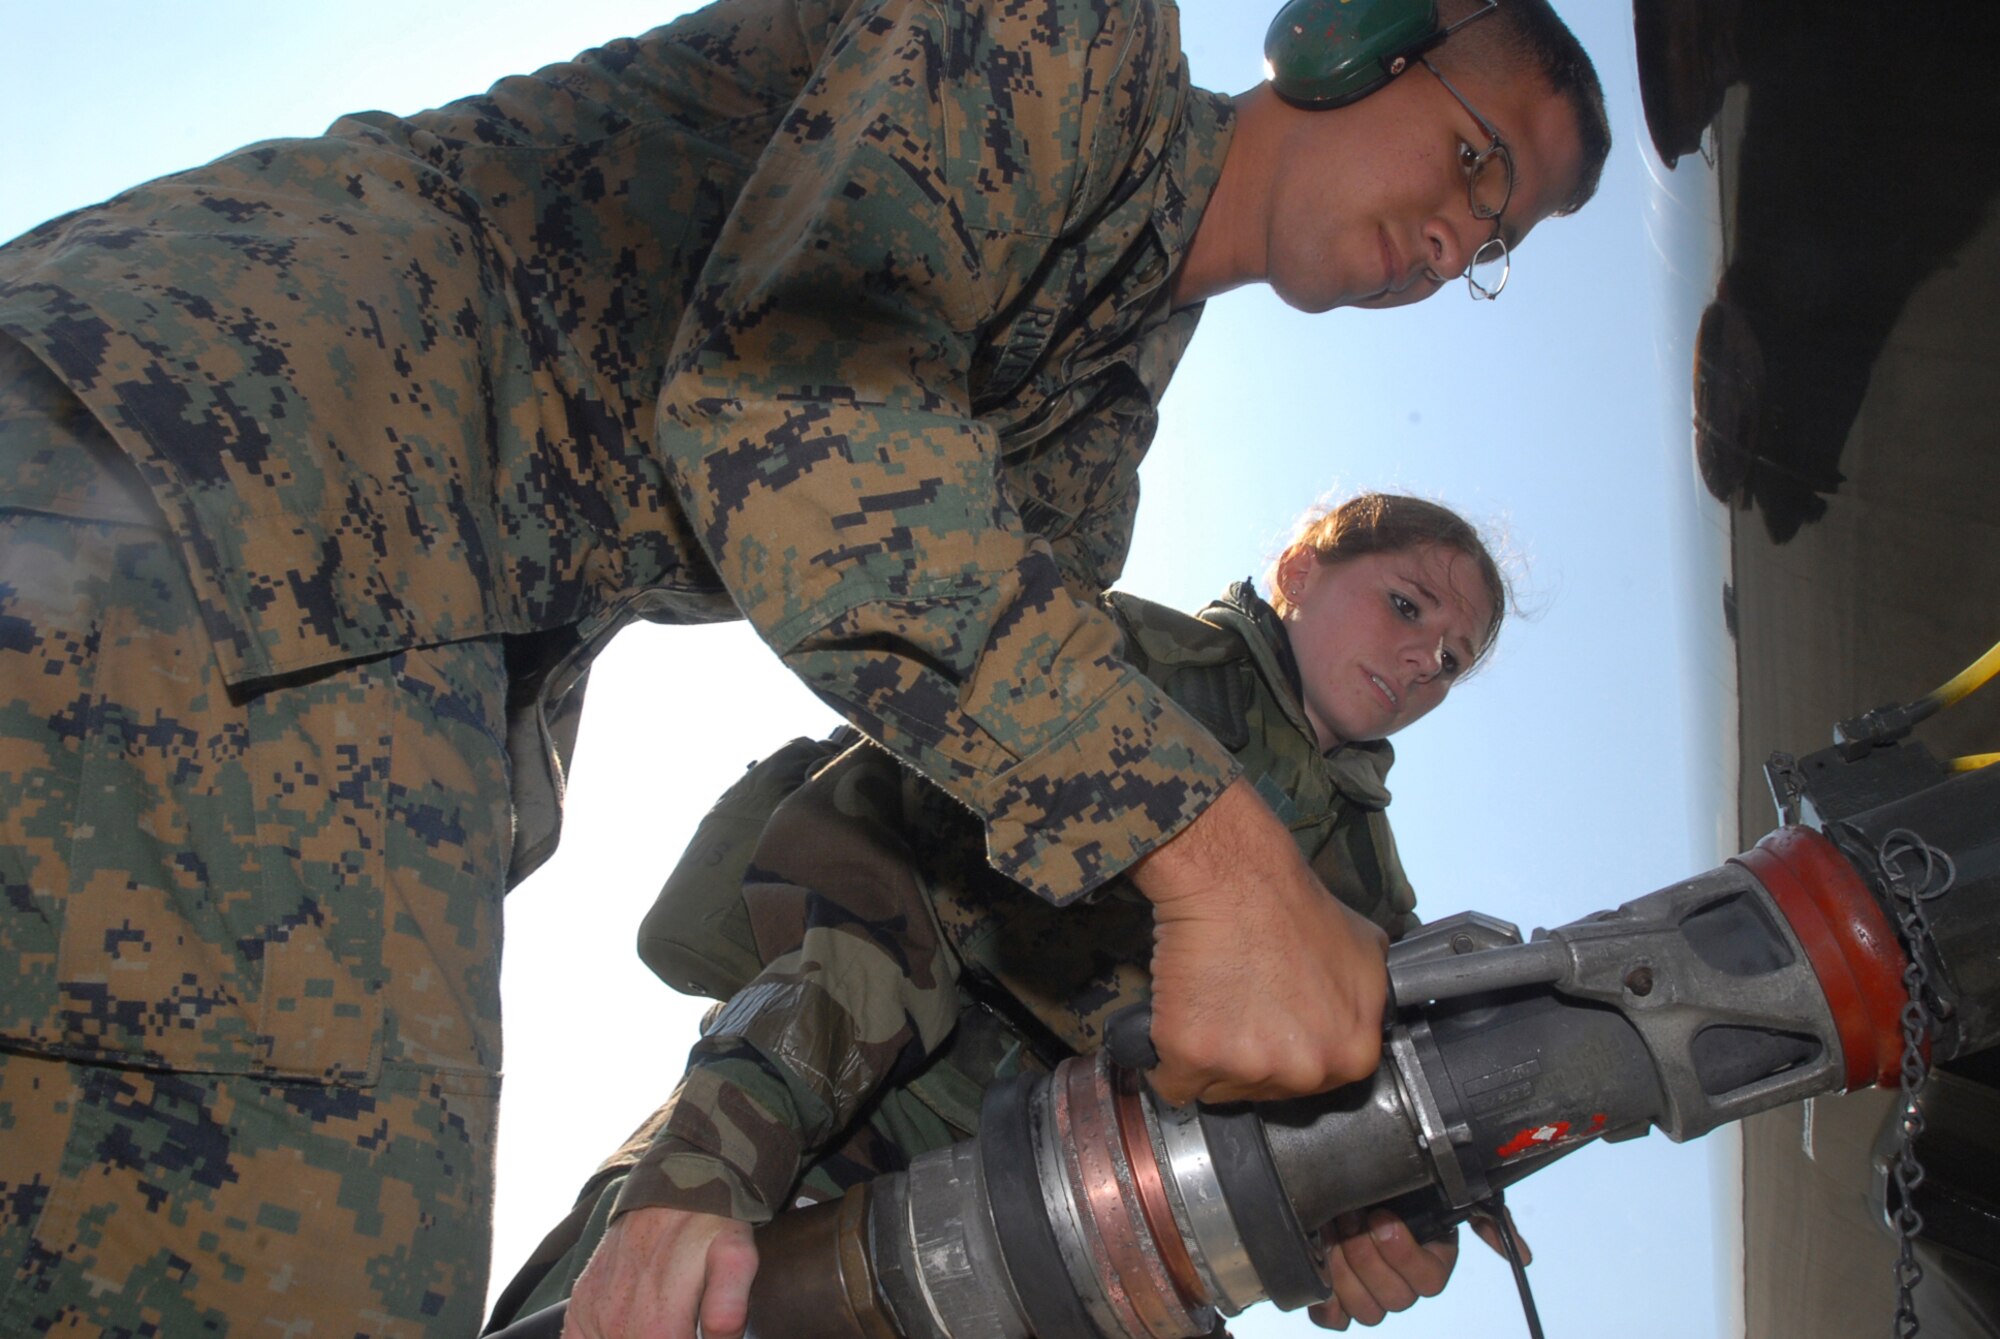 Lance Corporal Micha Martinez, MSWW 171, and Airman 1st Class Christina Flake, 18th Logistic Readiness Squadron, use a bottom loader to pump fuel into the fuel tanks of a R-11 fuel truck at Kadena Air Base, Japan, Dec. 6, 2007. Airmen from the 18th Wing joined with elements from the 1st Marine Aircraft Wing to conduct a joint operational readiness exercise here Dec. 3-7. (U.S. Air Force/Senior Airman Darnell T. Cannady)